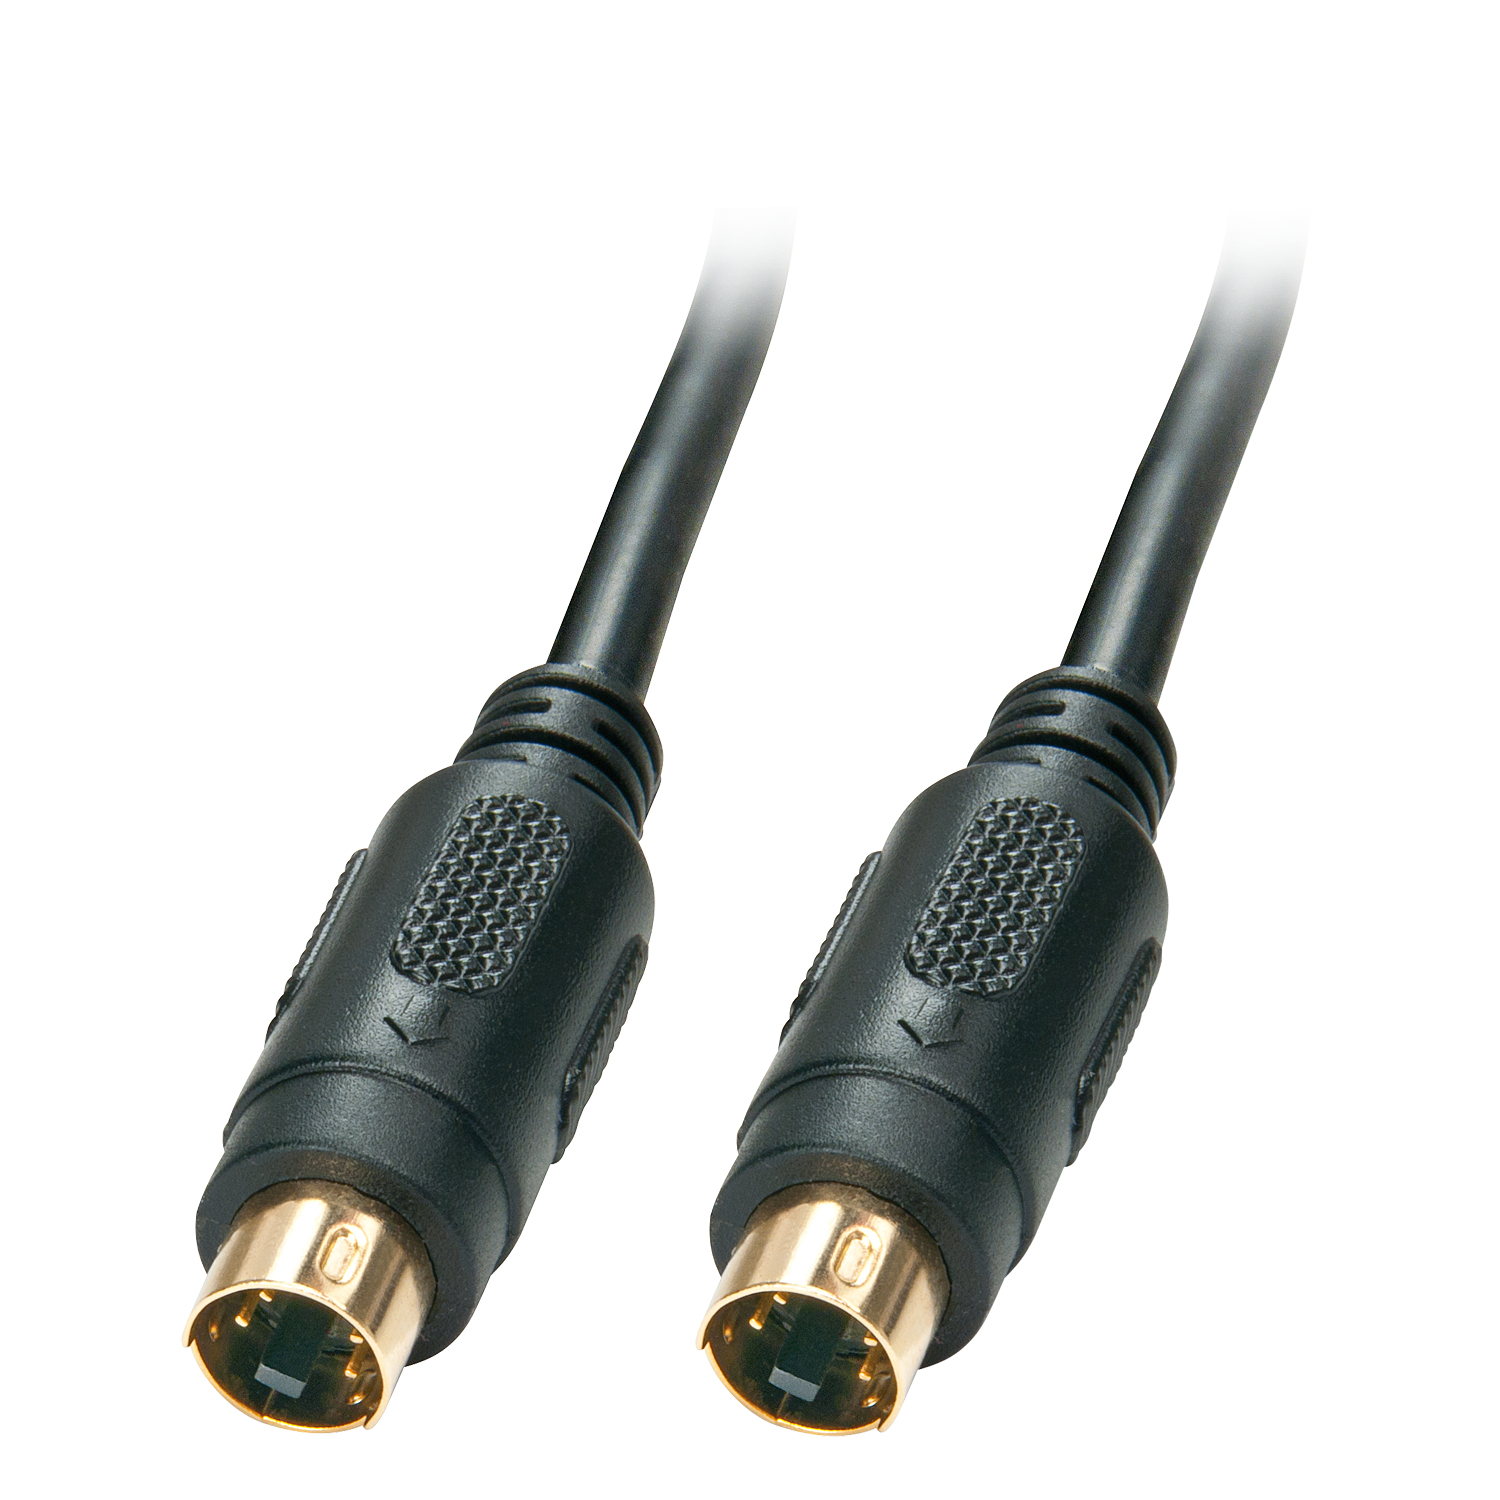 Lindy S-Video Cable 2 M S-Video  (4-Pin) Black  35630 - eet01